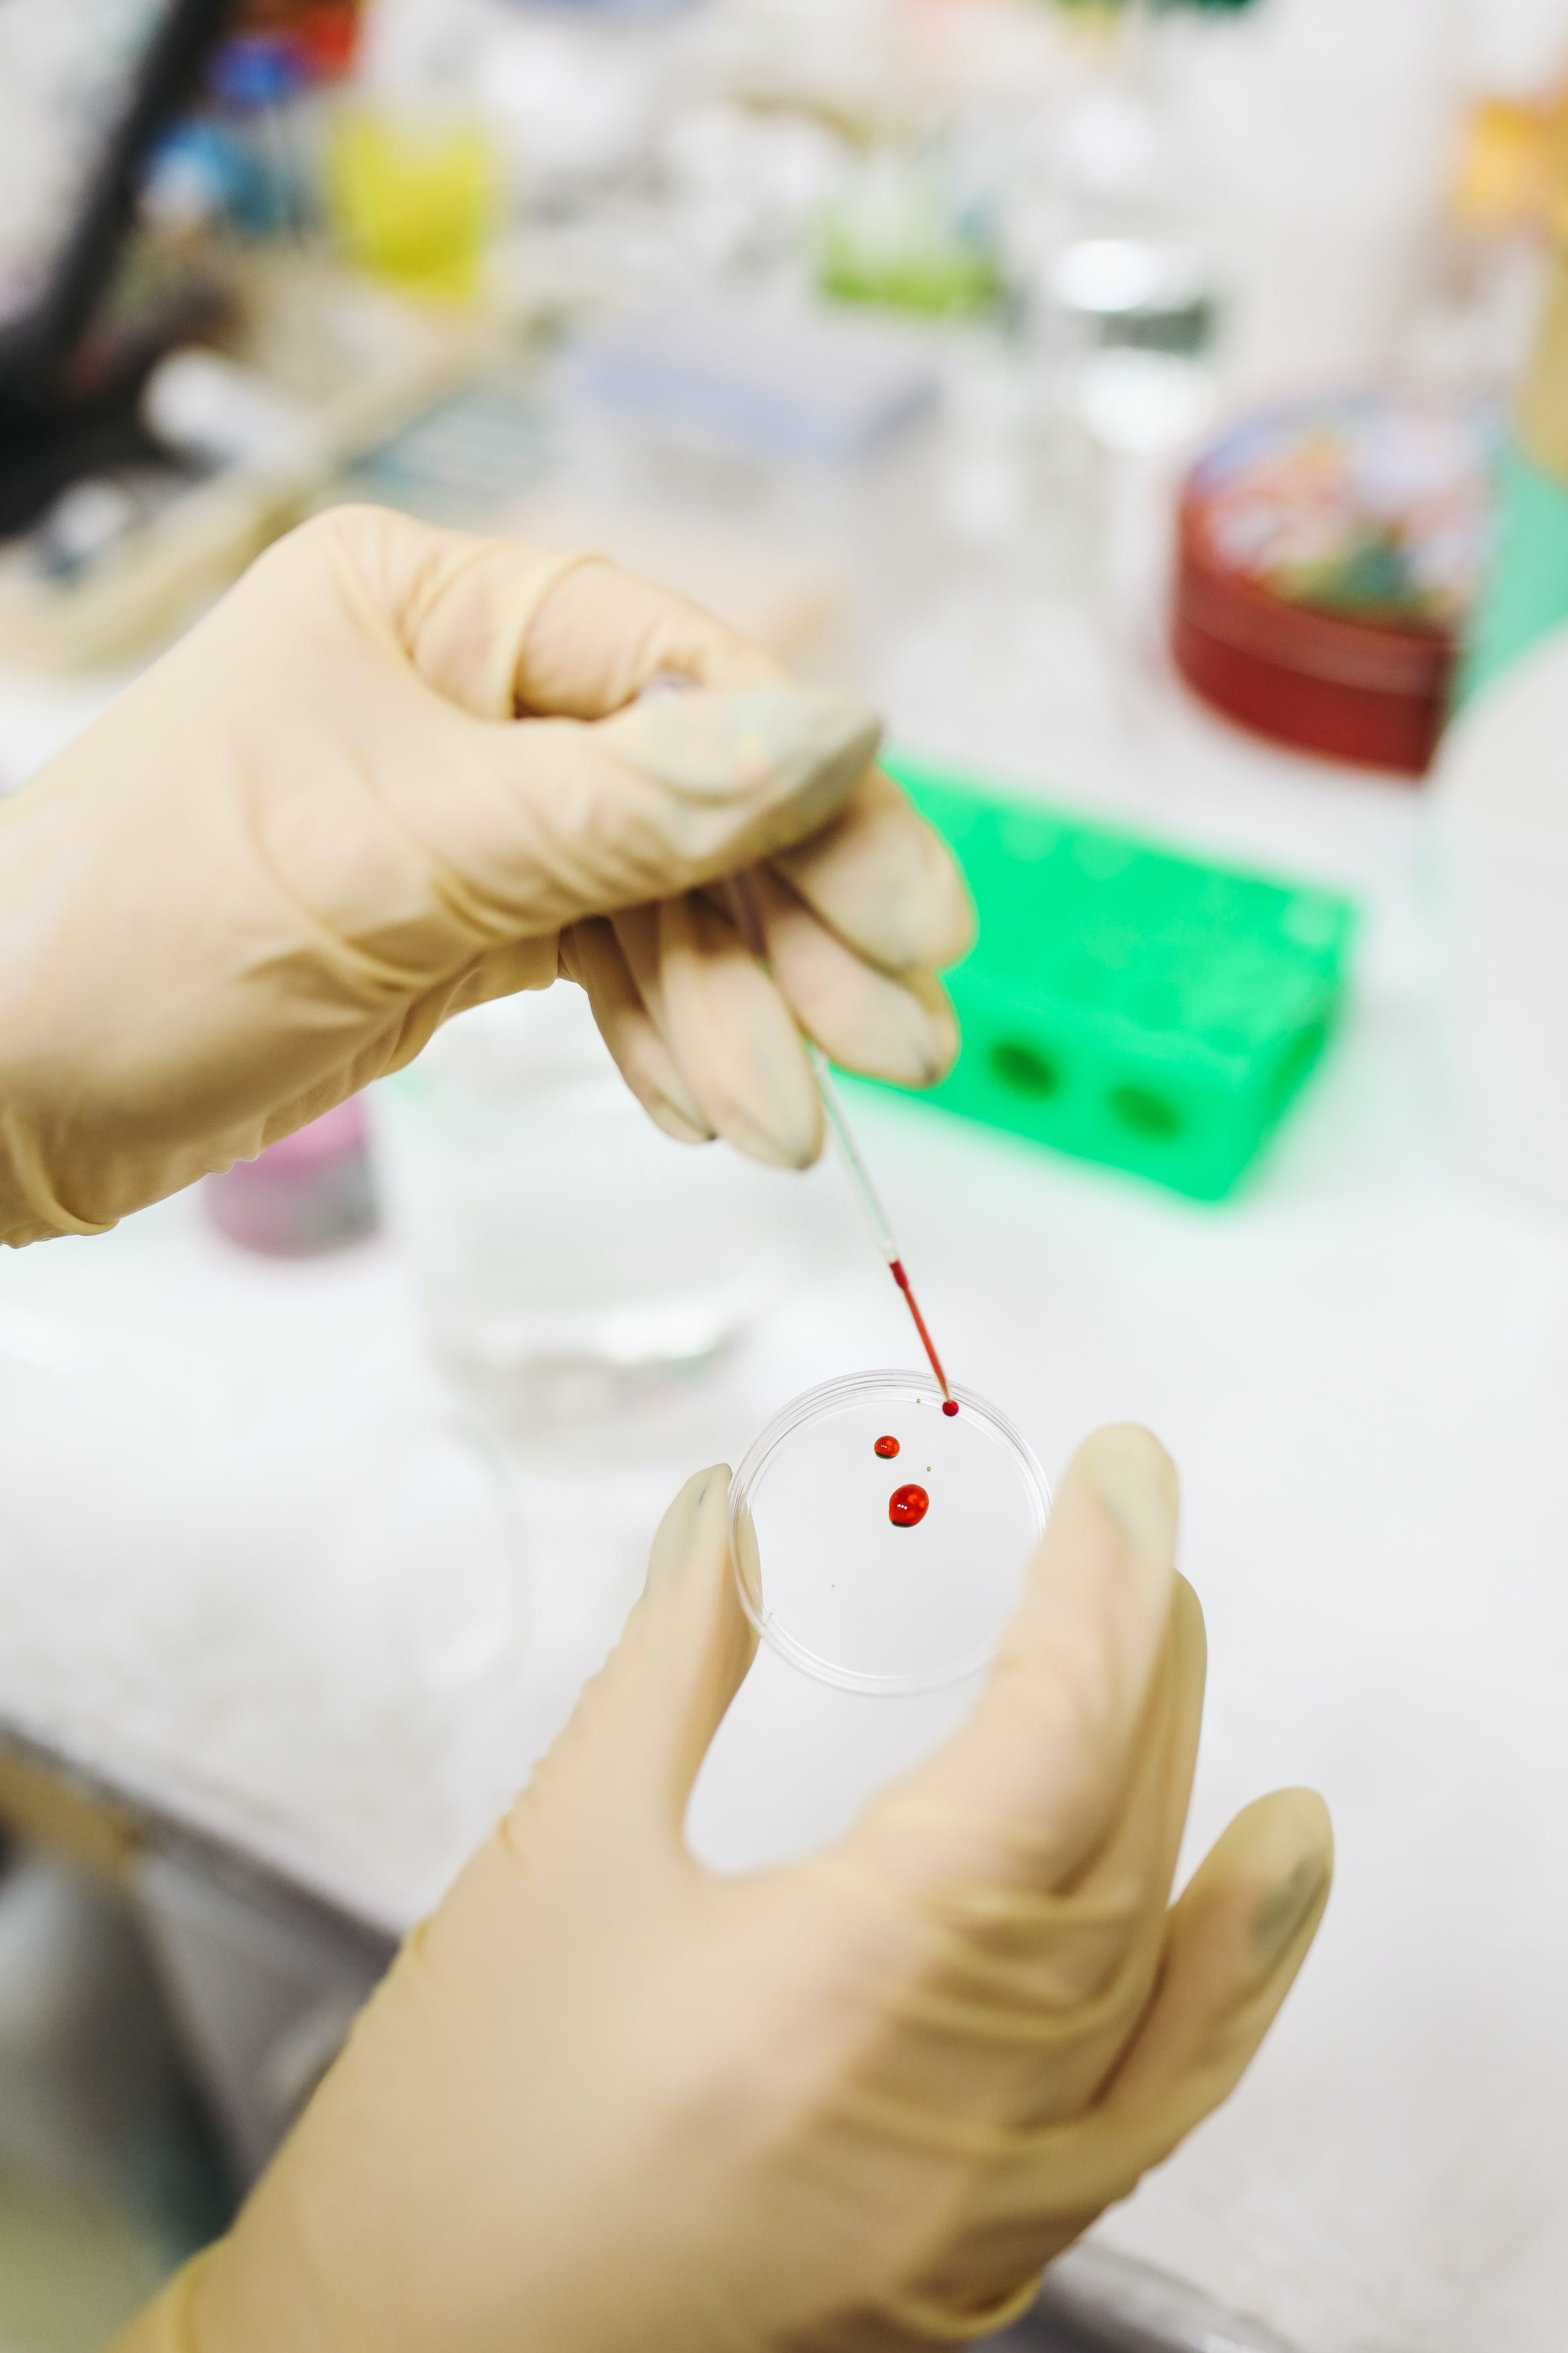 A person conducting a blood test. | Source: Pexels